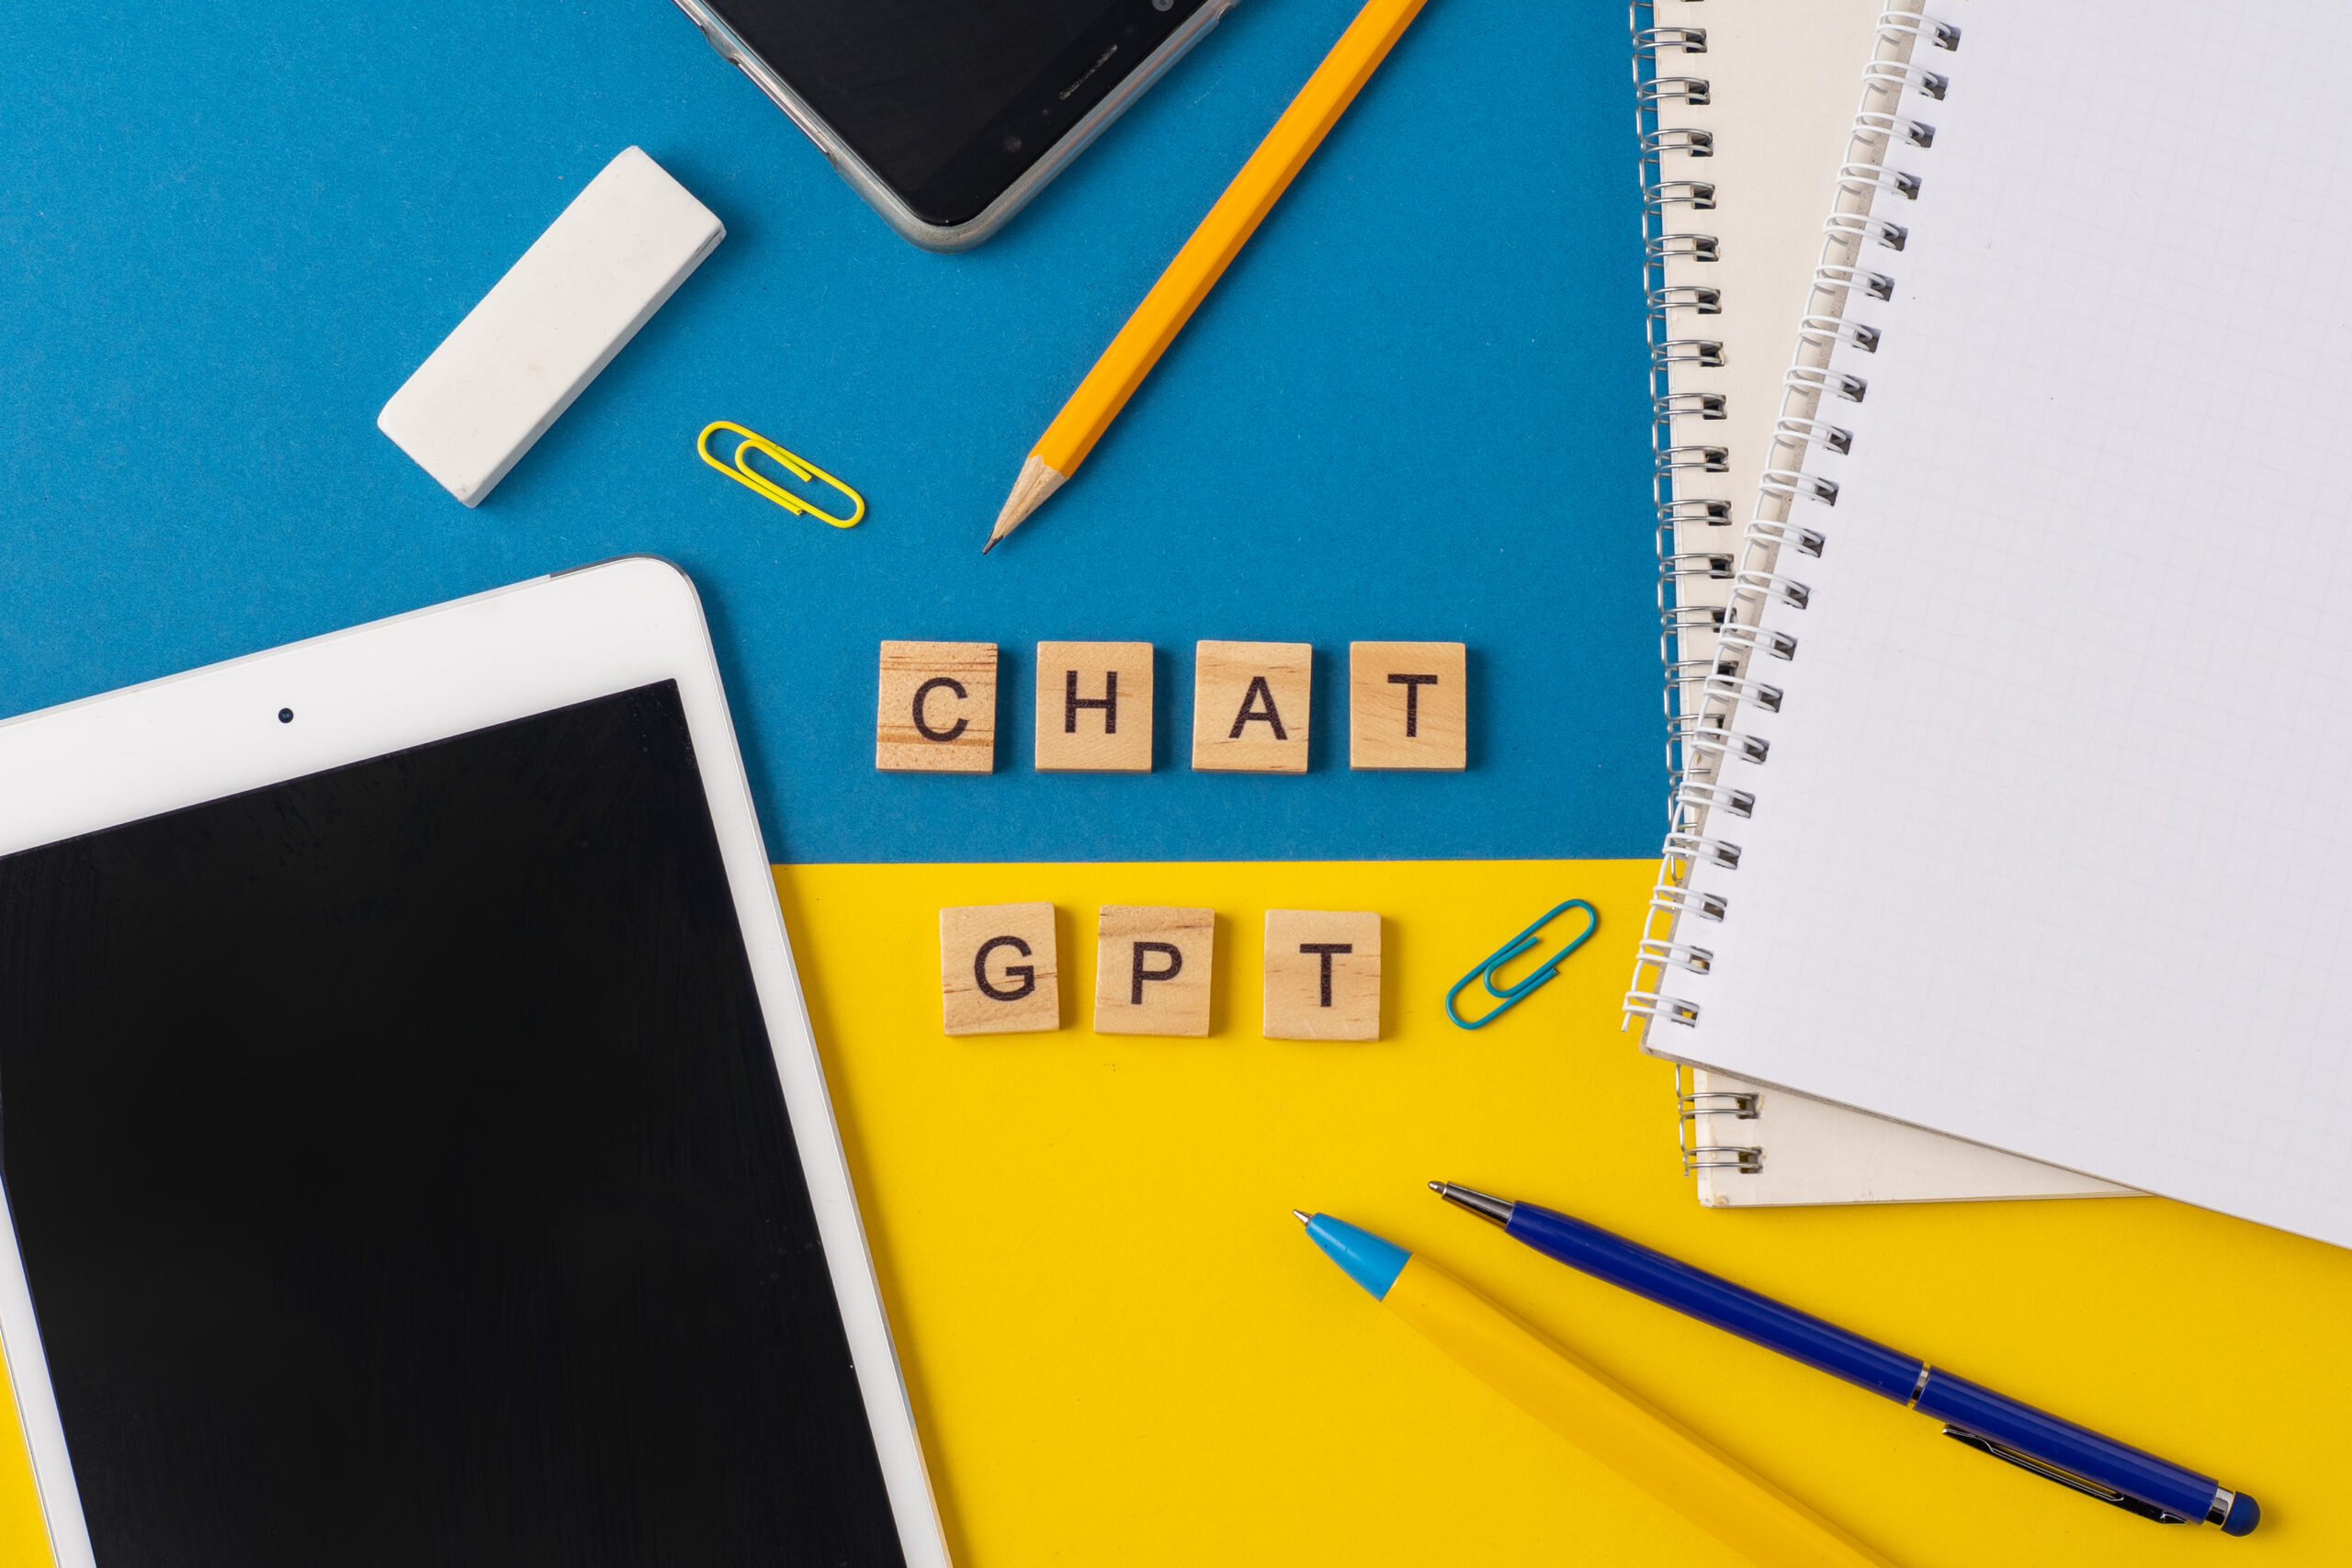 birds eye view of a tablet and pens with tiles spelling out Chat GPT.